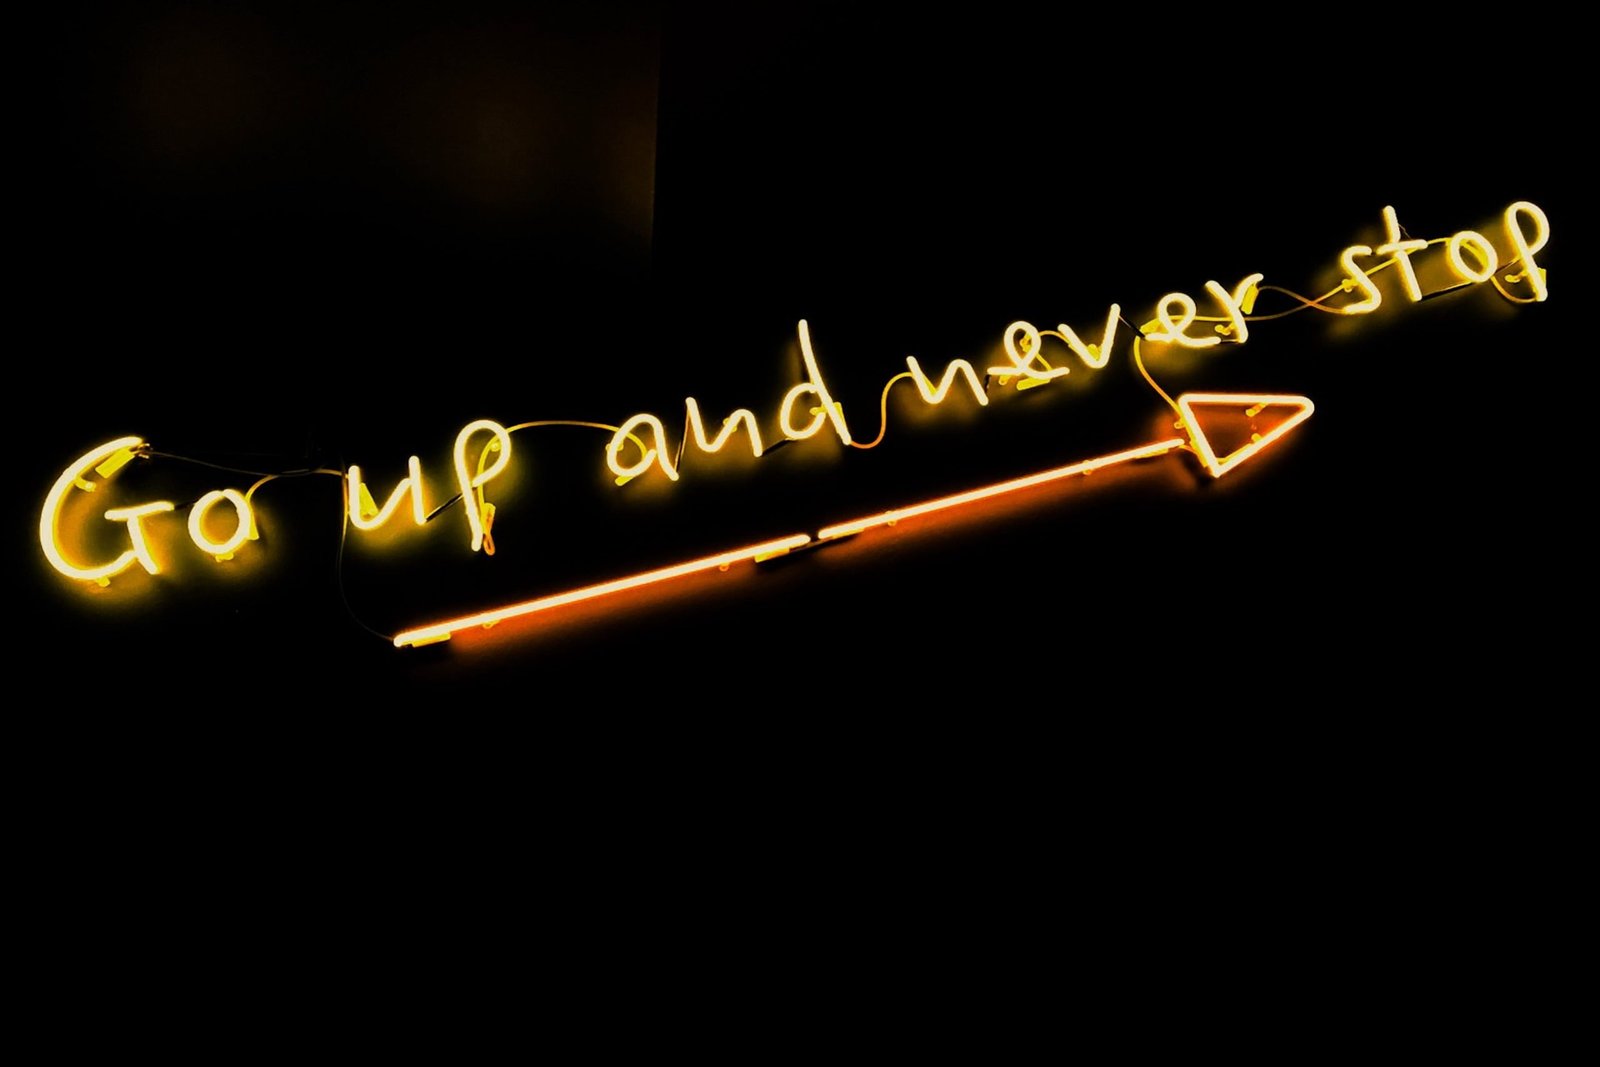 yellow neon sign saying: go up and never stop